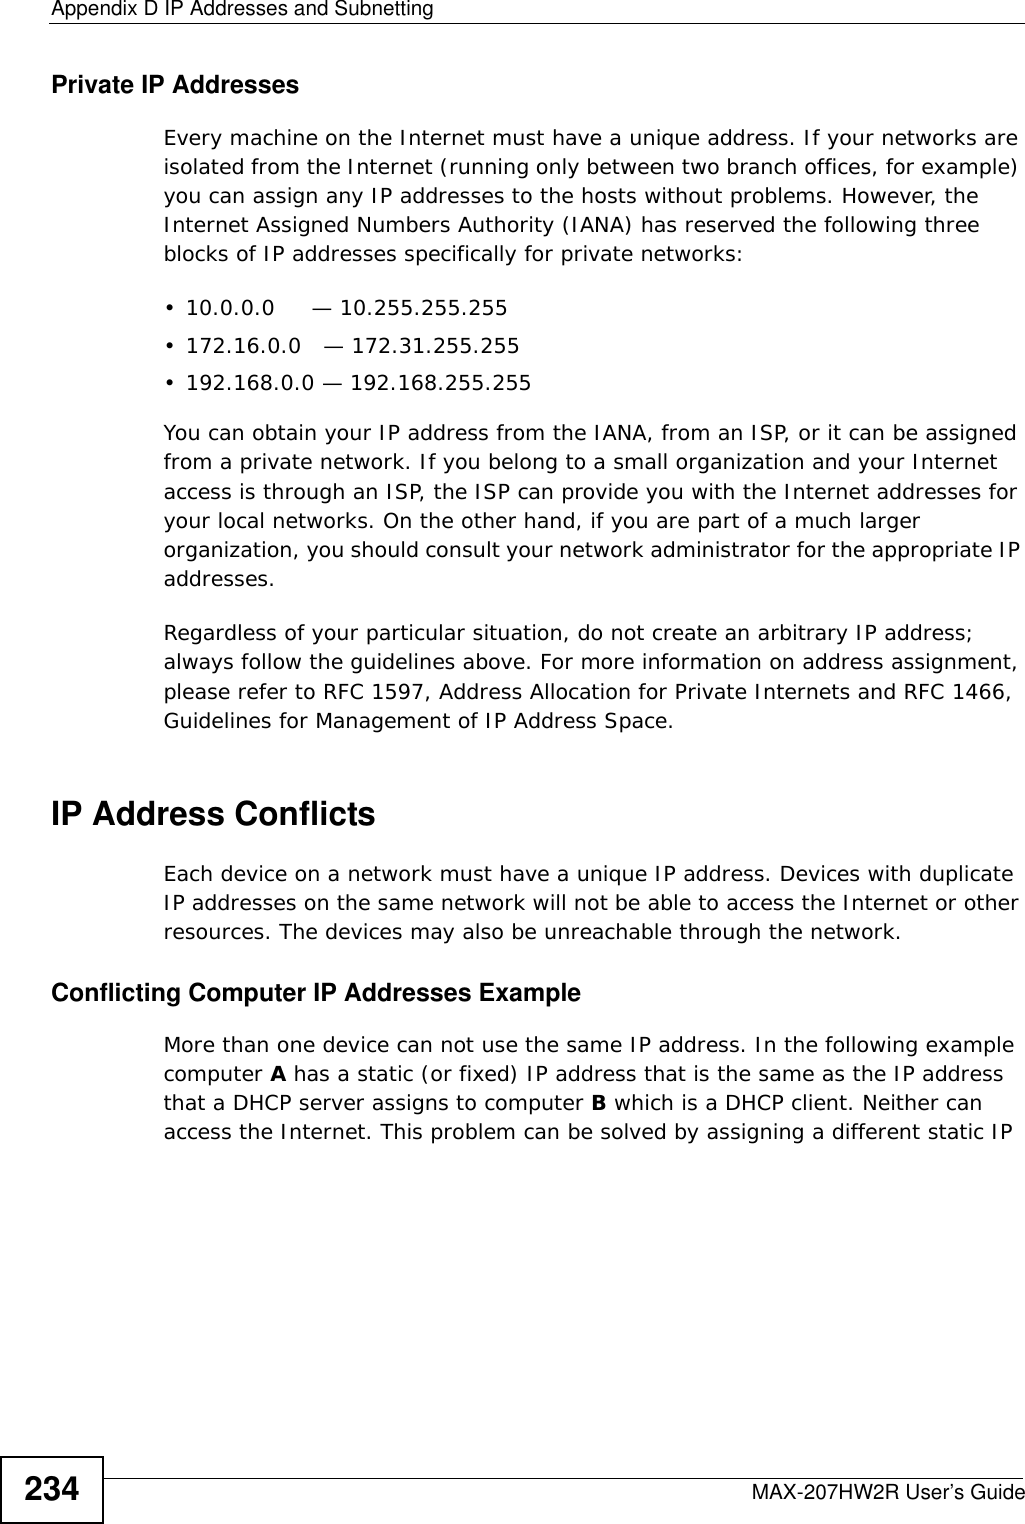 Appendix D IP Addresses and SubnettingMAX-207HW2R User’s Guide234Private IP AddressesEvery machine on the Internet must have a unique address. If your networks are isolated from the Internet (running only between two branch offices, for example) you can assign any IP addresses to the hosts without problems. However, the Internet Assigned Numbers Authority (IANA) has reserved the following three blocks of IP addresses specifically for private networks:• 10.0.0.0     — 10.255.255.255• 172.16.0.0   — 172.31.255.255• 192.168.0.0 — 192.168.255.255You can obtain your IP address from the IANA, from an ISP, or it can be assigned from a private network. If you belong to a small organization and your Internet access is through an ISP, the ISP can provide you with the Internet addresses for your local networks. On the other hand, if you are part of a much larger organization, you should consult your network administrator for the appropriate IP addresses.Regardless of your particular situation, do not create an arbitrary IP address; always follow the guidelines above. For more information on address assignment, please refer to RFC 1597, Address Allocation for Private Internets and RFC 1466, Guidelines for Management of IP Address Space.IP Address ConflictsEach device on a network must have a unique IP address. Devices with duplicate IP addresses on the same network will not be able to access the Internet or other resources. The devices may also be unreachable through the network. Conflicting Computer IP Addresses ExampleMore than one device can not use the same IP address. In the following example computer A has a static (or fixed) IP address that is the same as the IP address that a DHCP server assigns to computer B which is a DHCP client. Neither can access the Internet. This problem can be solved by assigning a different static IP 